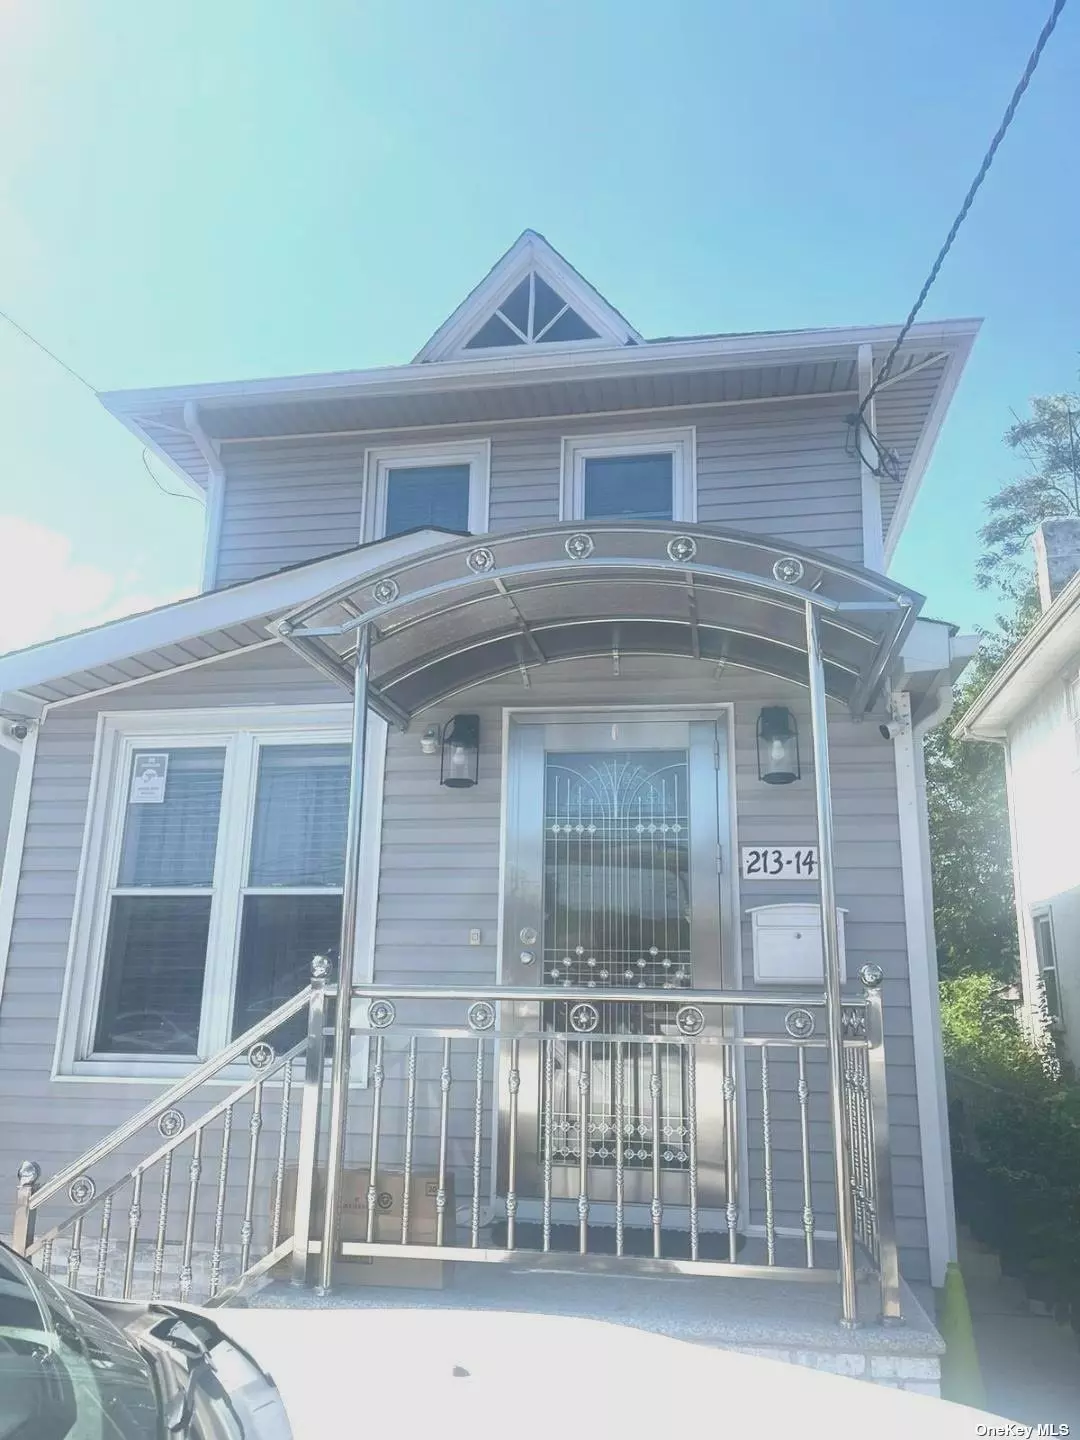 Welcome home to this fully updated 2 story home!! new windows, flooring, bathrooms, fully finished basement , all new floors , kitchen, roof, siding, huge one car garage, private driveway, solar panel etc come check it out this surely won&rsquo;t last, One of a kind